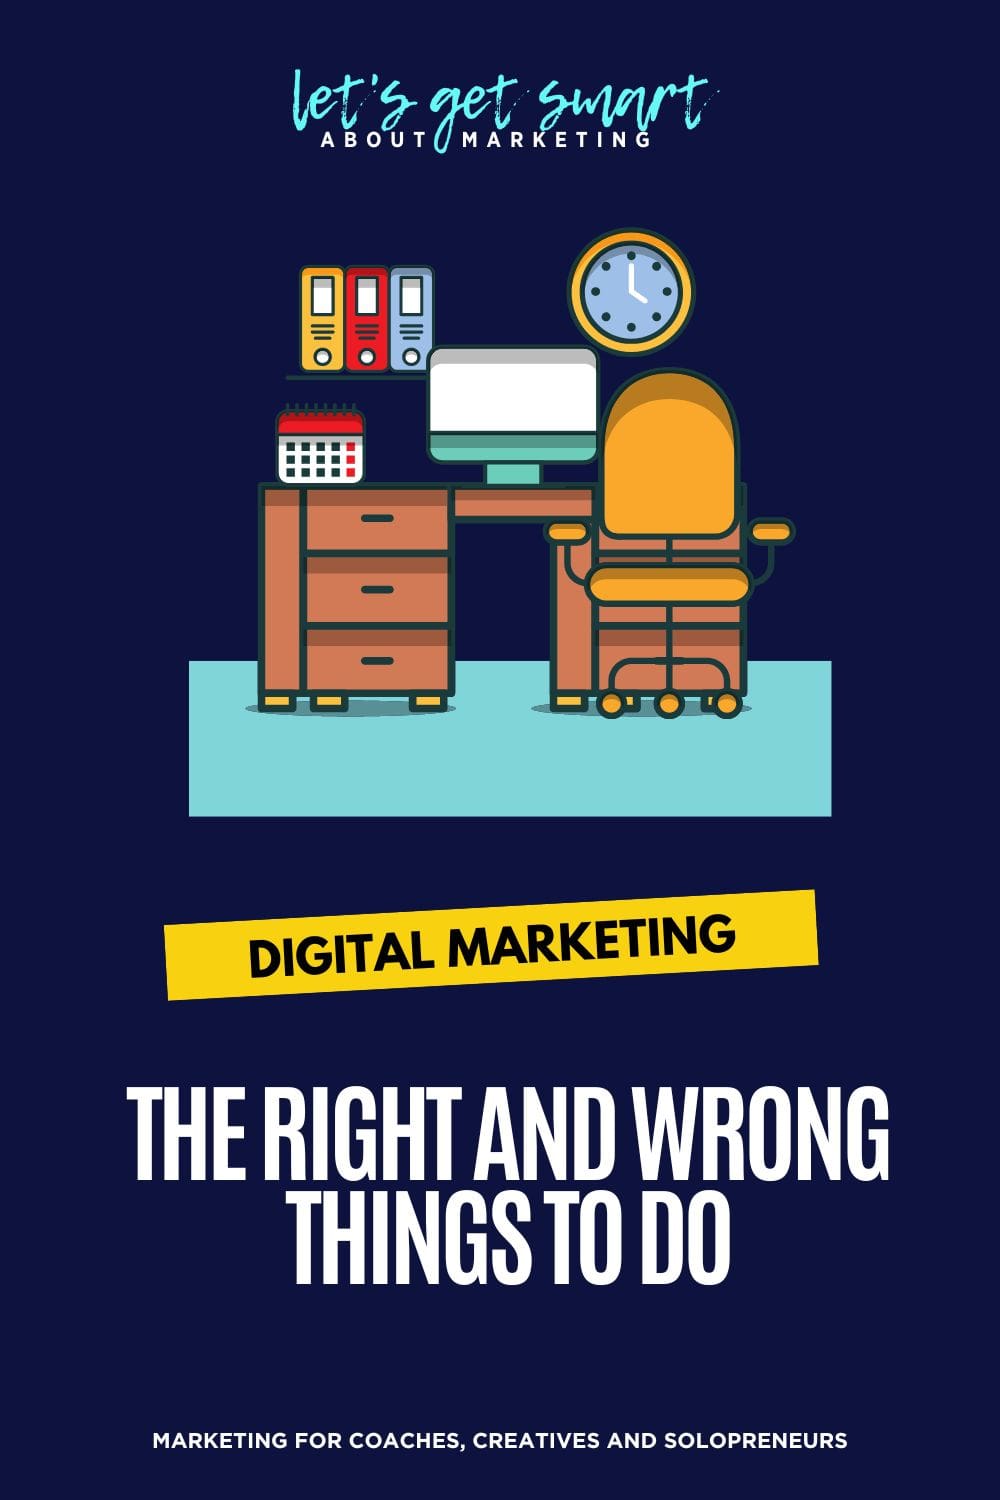 Launching a New Business on Instagram The Right and Wrong Things to Do